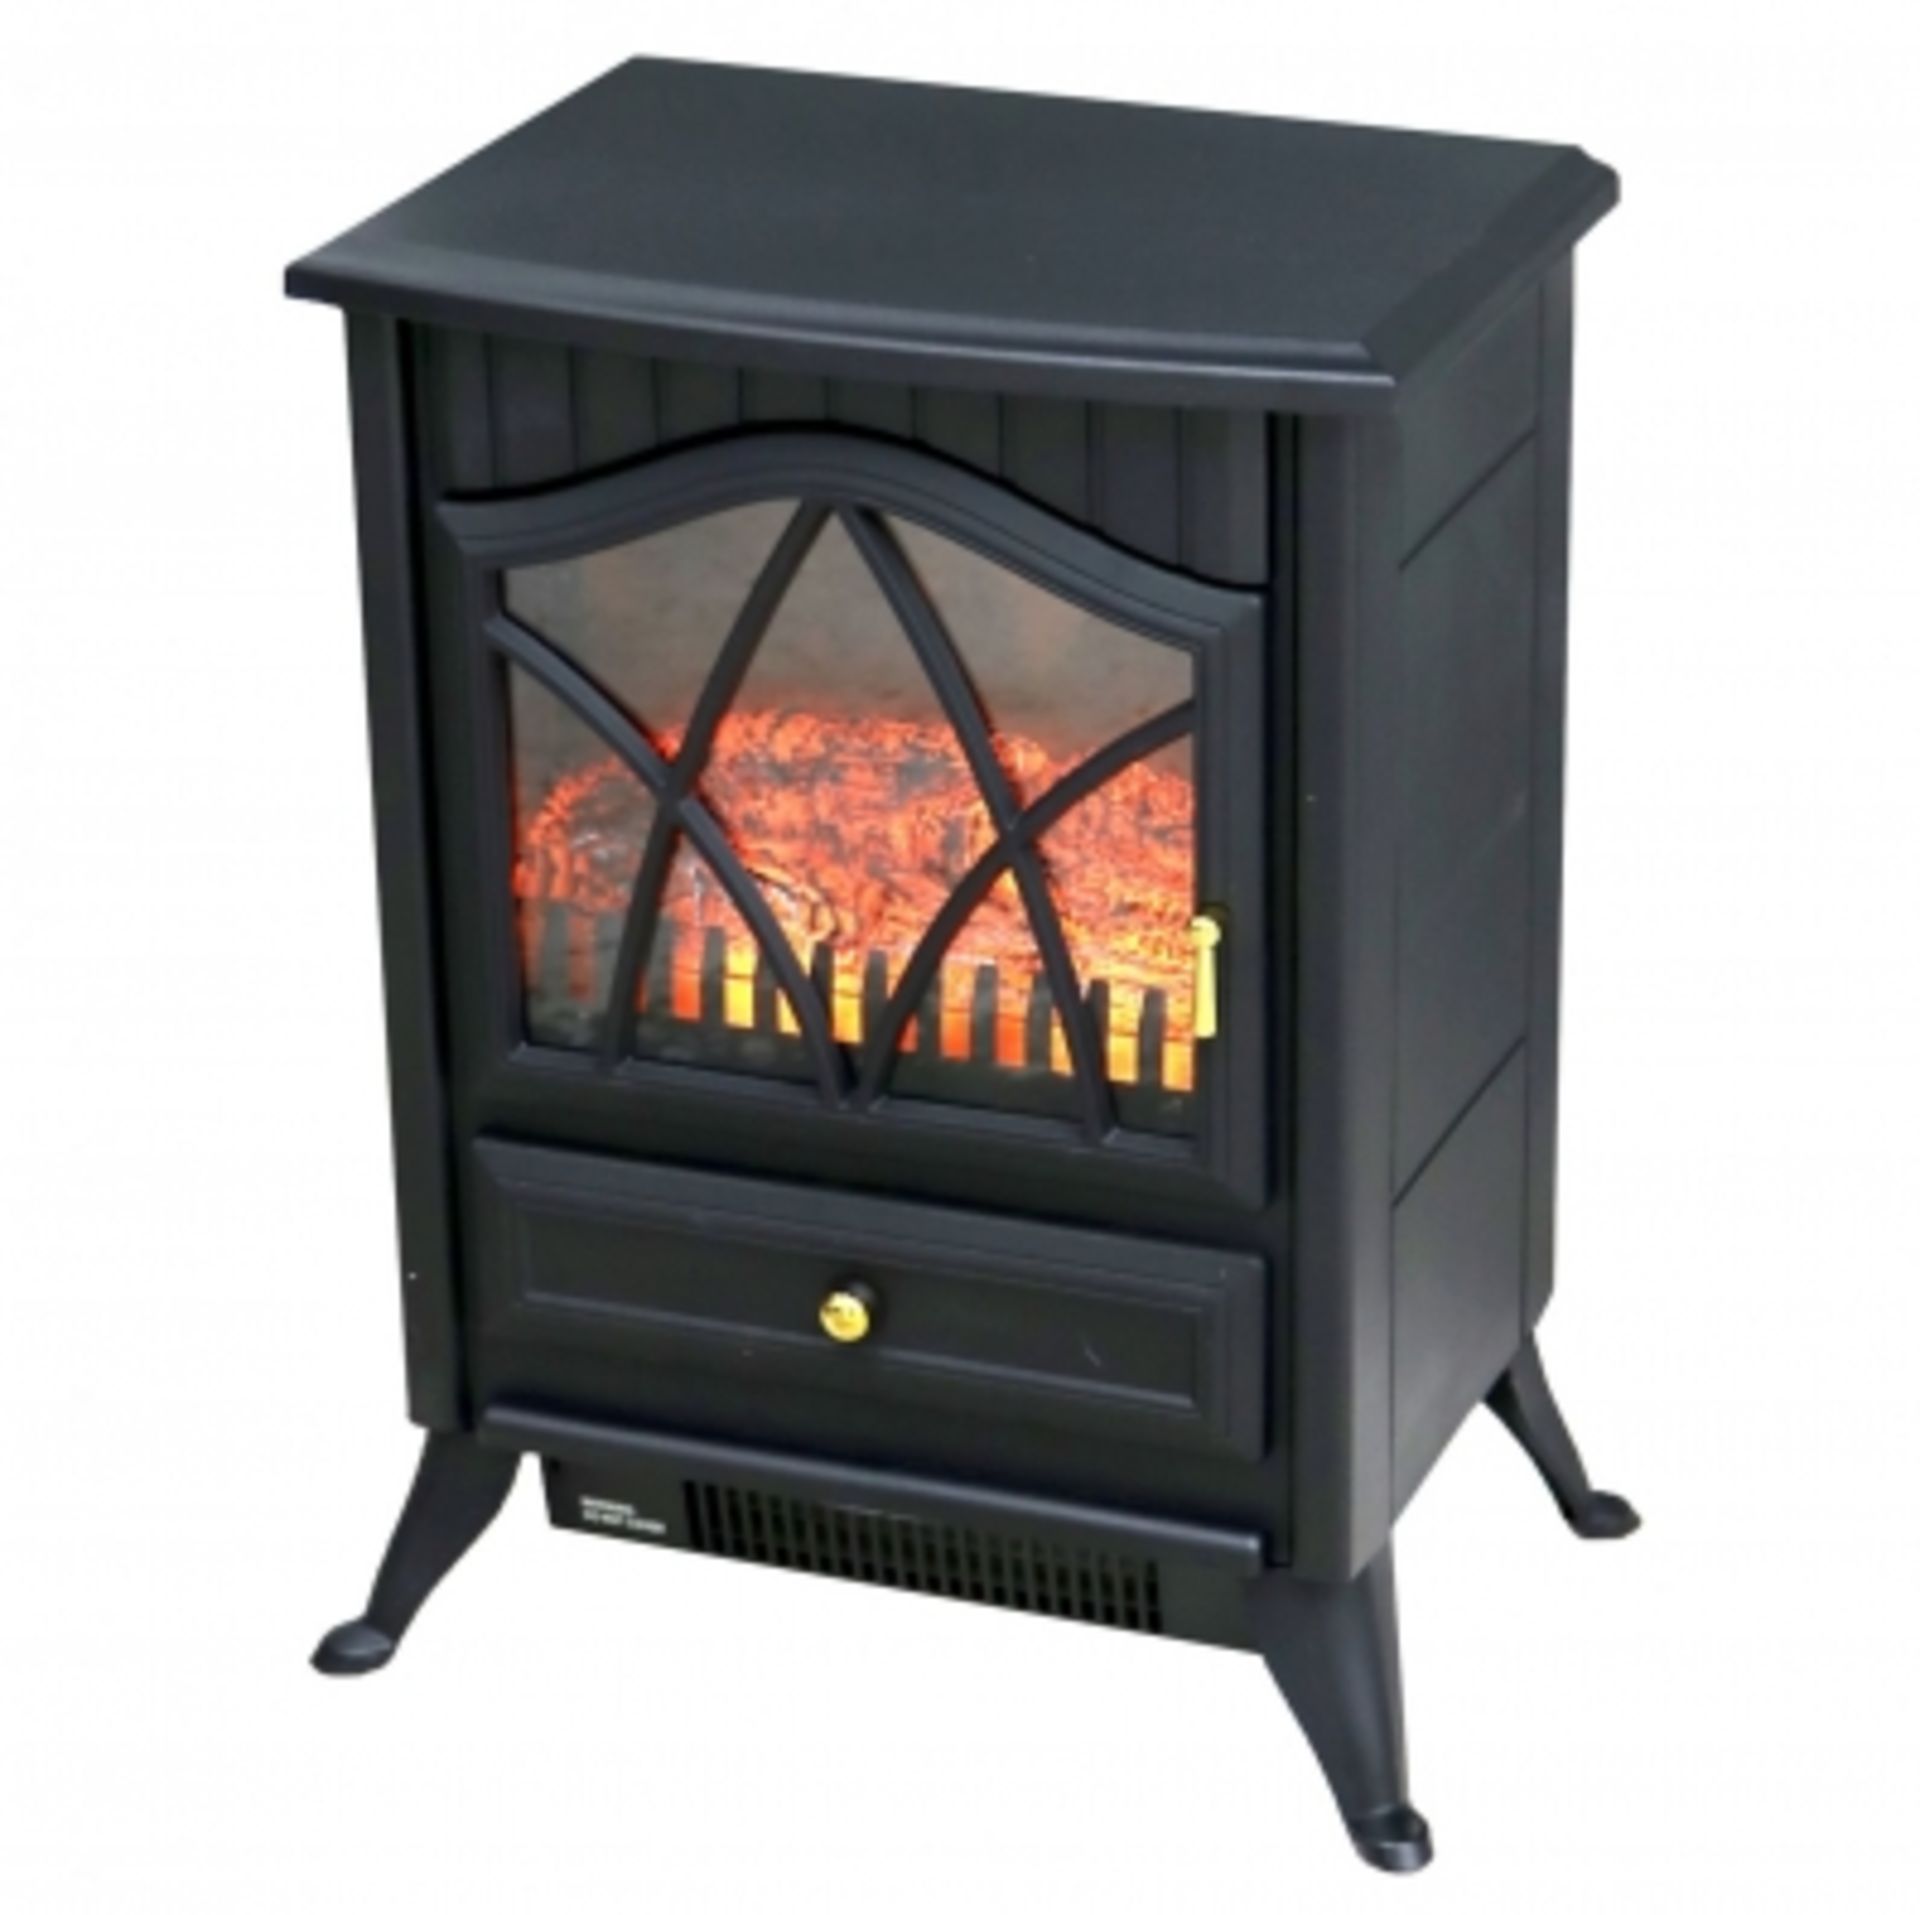 (KK41) 1850W Log Burner Flame Effect Electric Fireplace Stove Heater The electric traditiona...